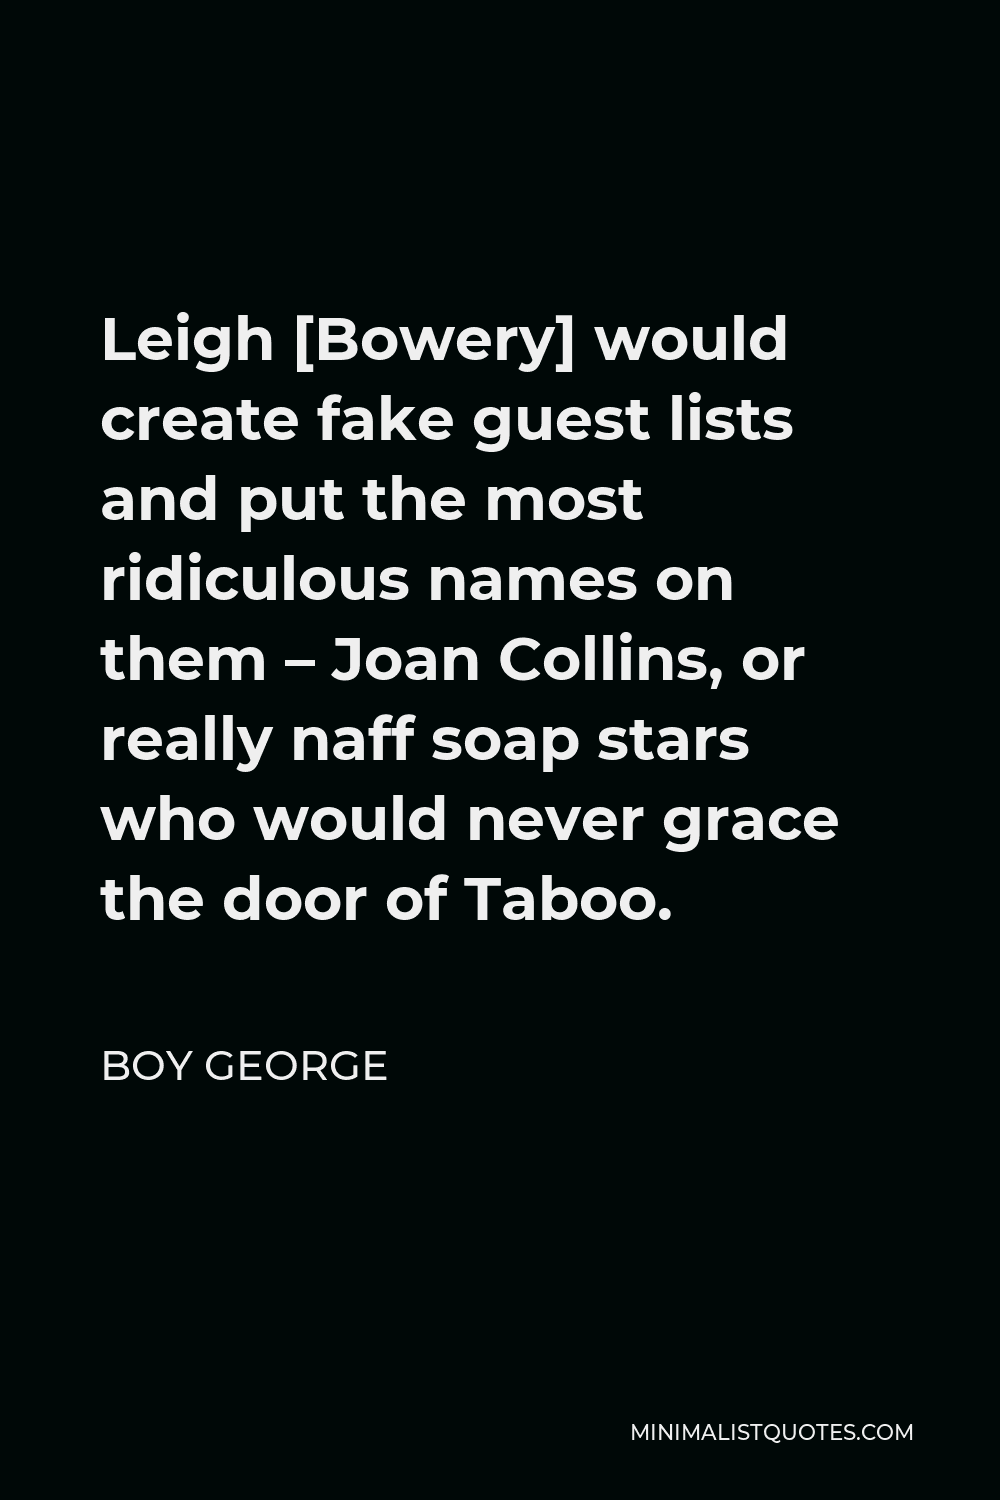 Boy George Quote - Leigh [Bowery] would create fake guest lists and put the most ridiculous names on them – Joan Collins, or really naff soap stars who would never grace the door of Taboo.